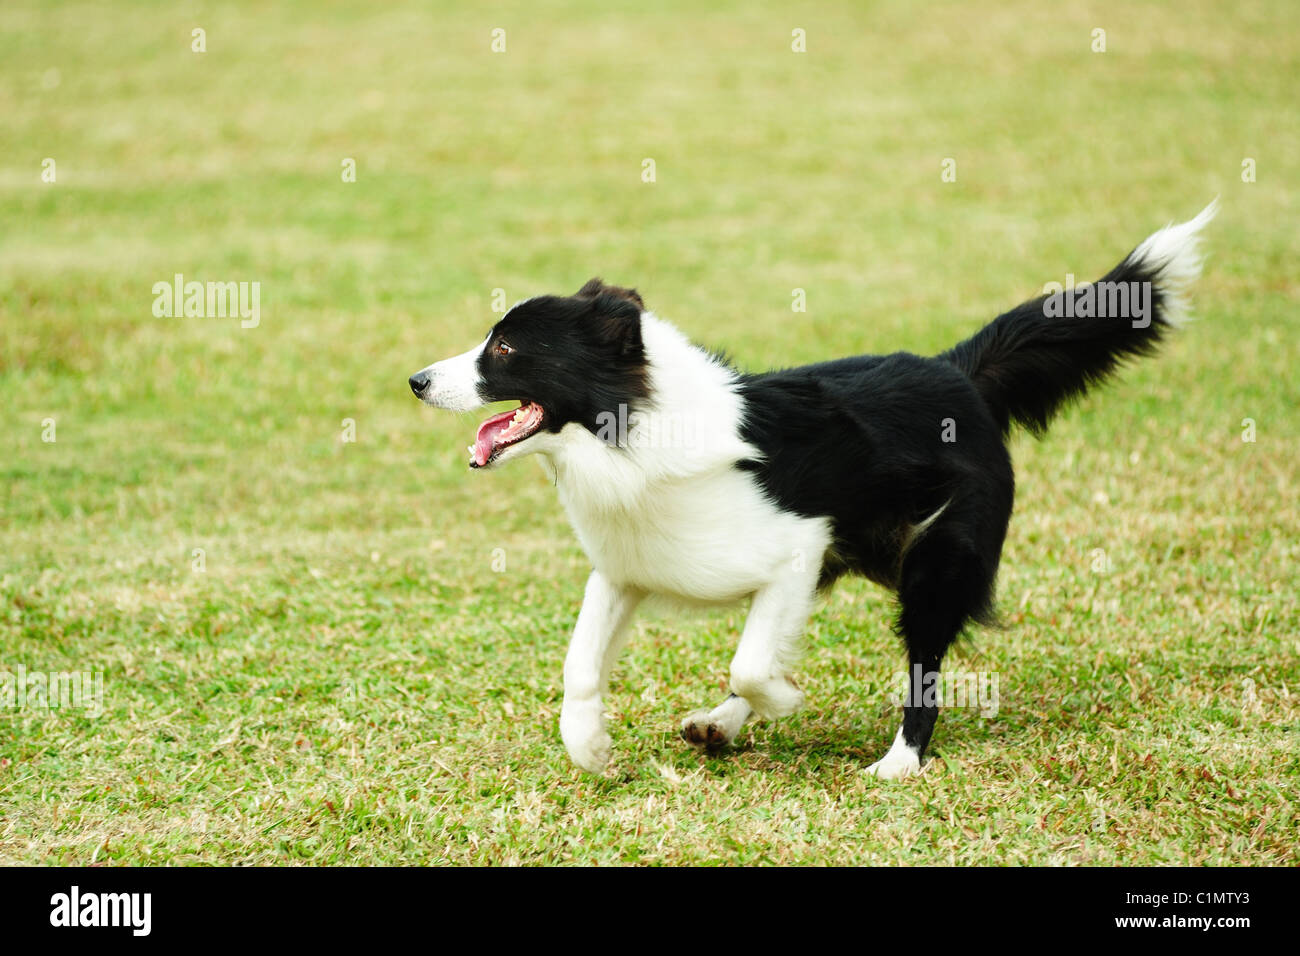 Border collie dog running on the lawn Stock Photo